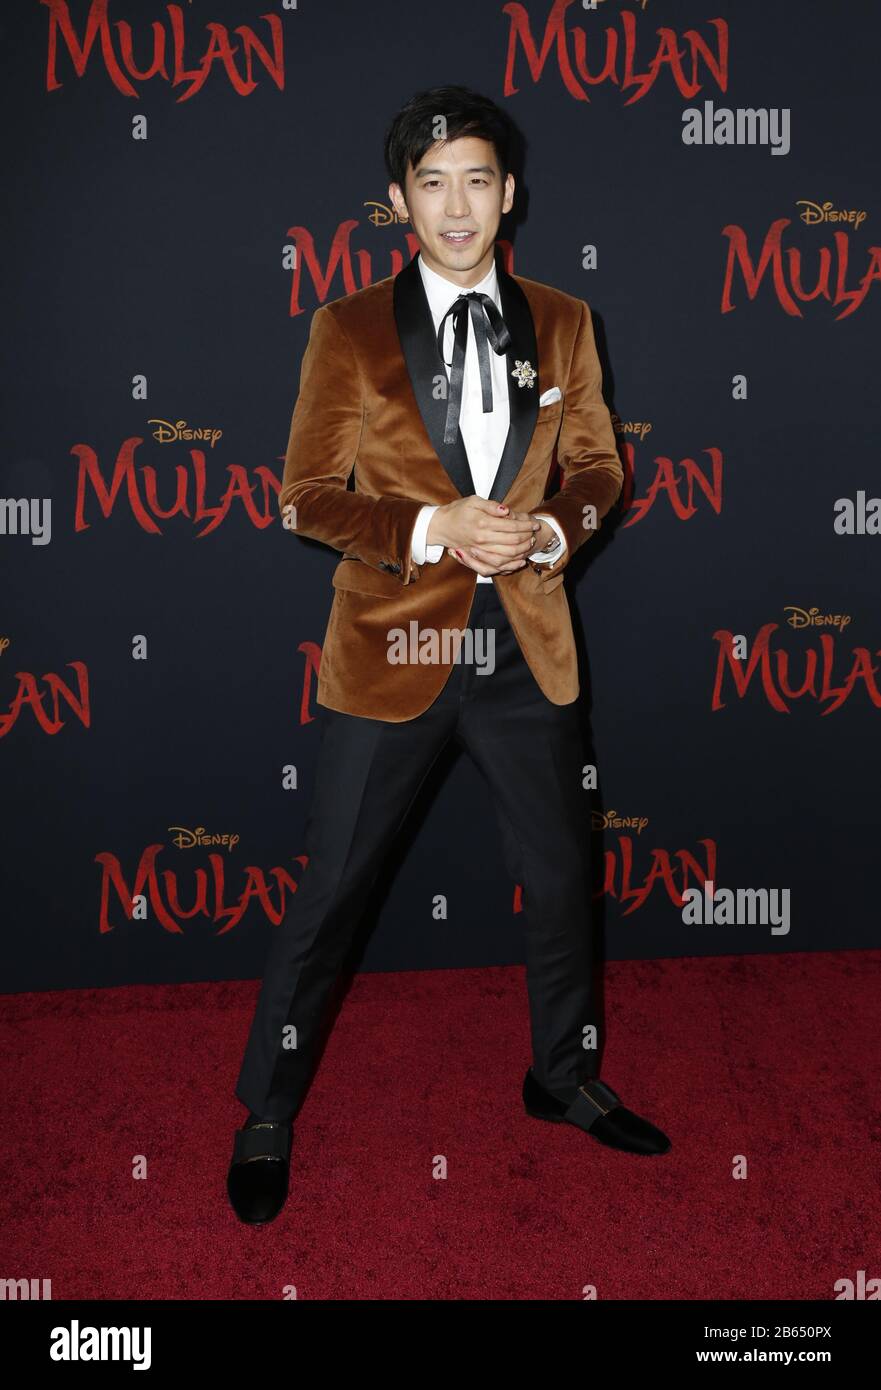 Hollywood, Ca. 9th Mar, 2020. Jimmy Wong, at Premiere Of Disney's 'Mulan' at The Dolby Theatre in Hollywood California on March 9, 2020. Credit: Faye Sadou/Media Punch/Alamy Live News Stock Photo